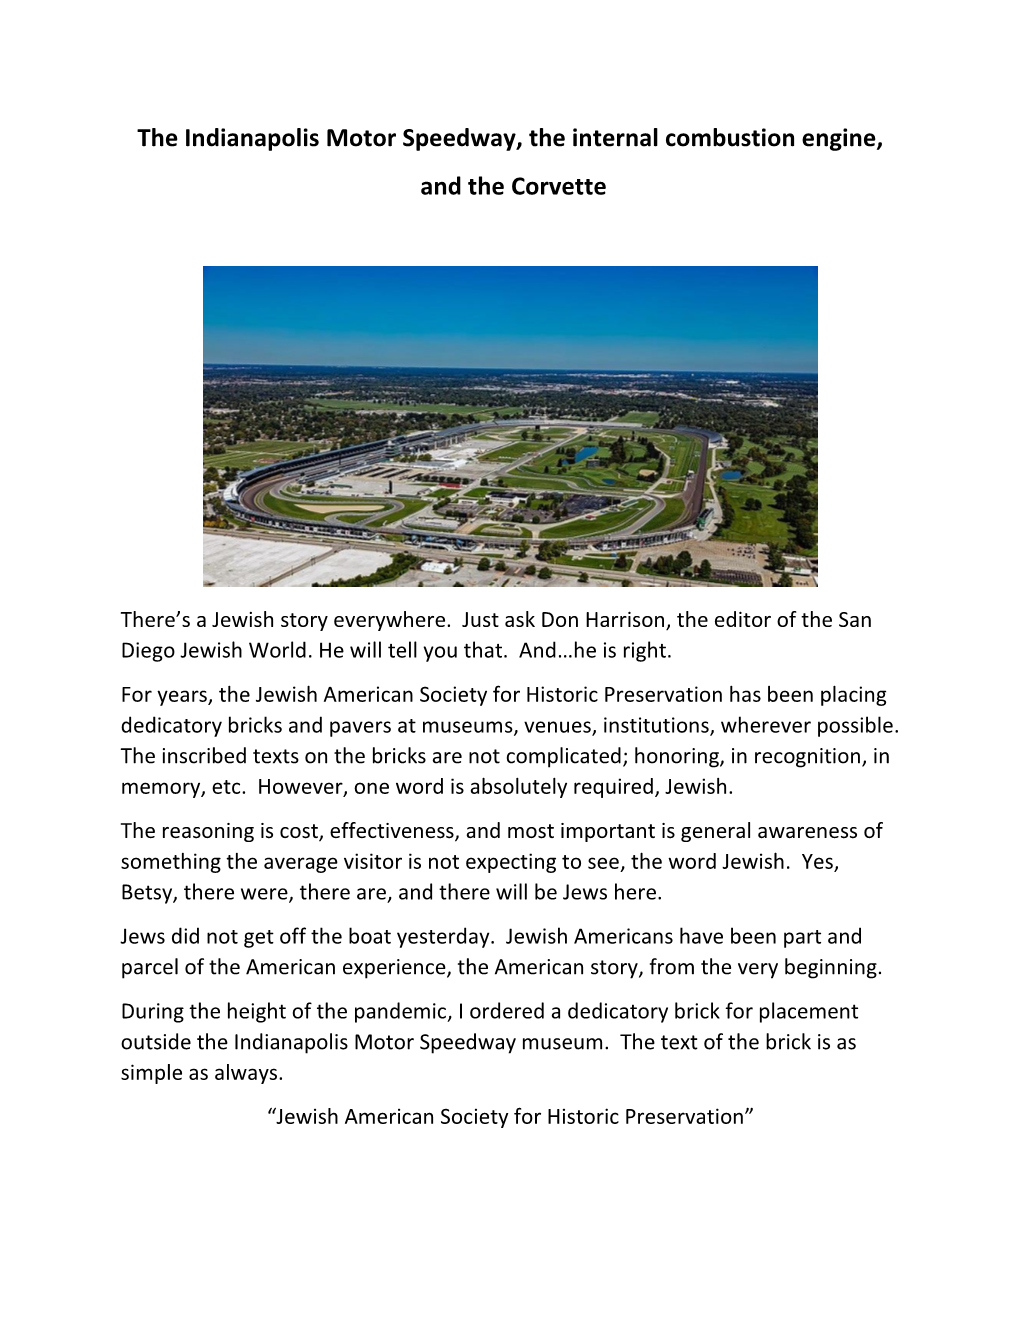 The Indianapolis Motor Speedway, the Internal Combustion Engine, and the Corvette